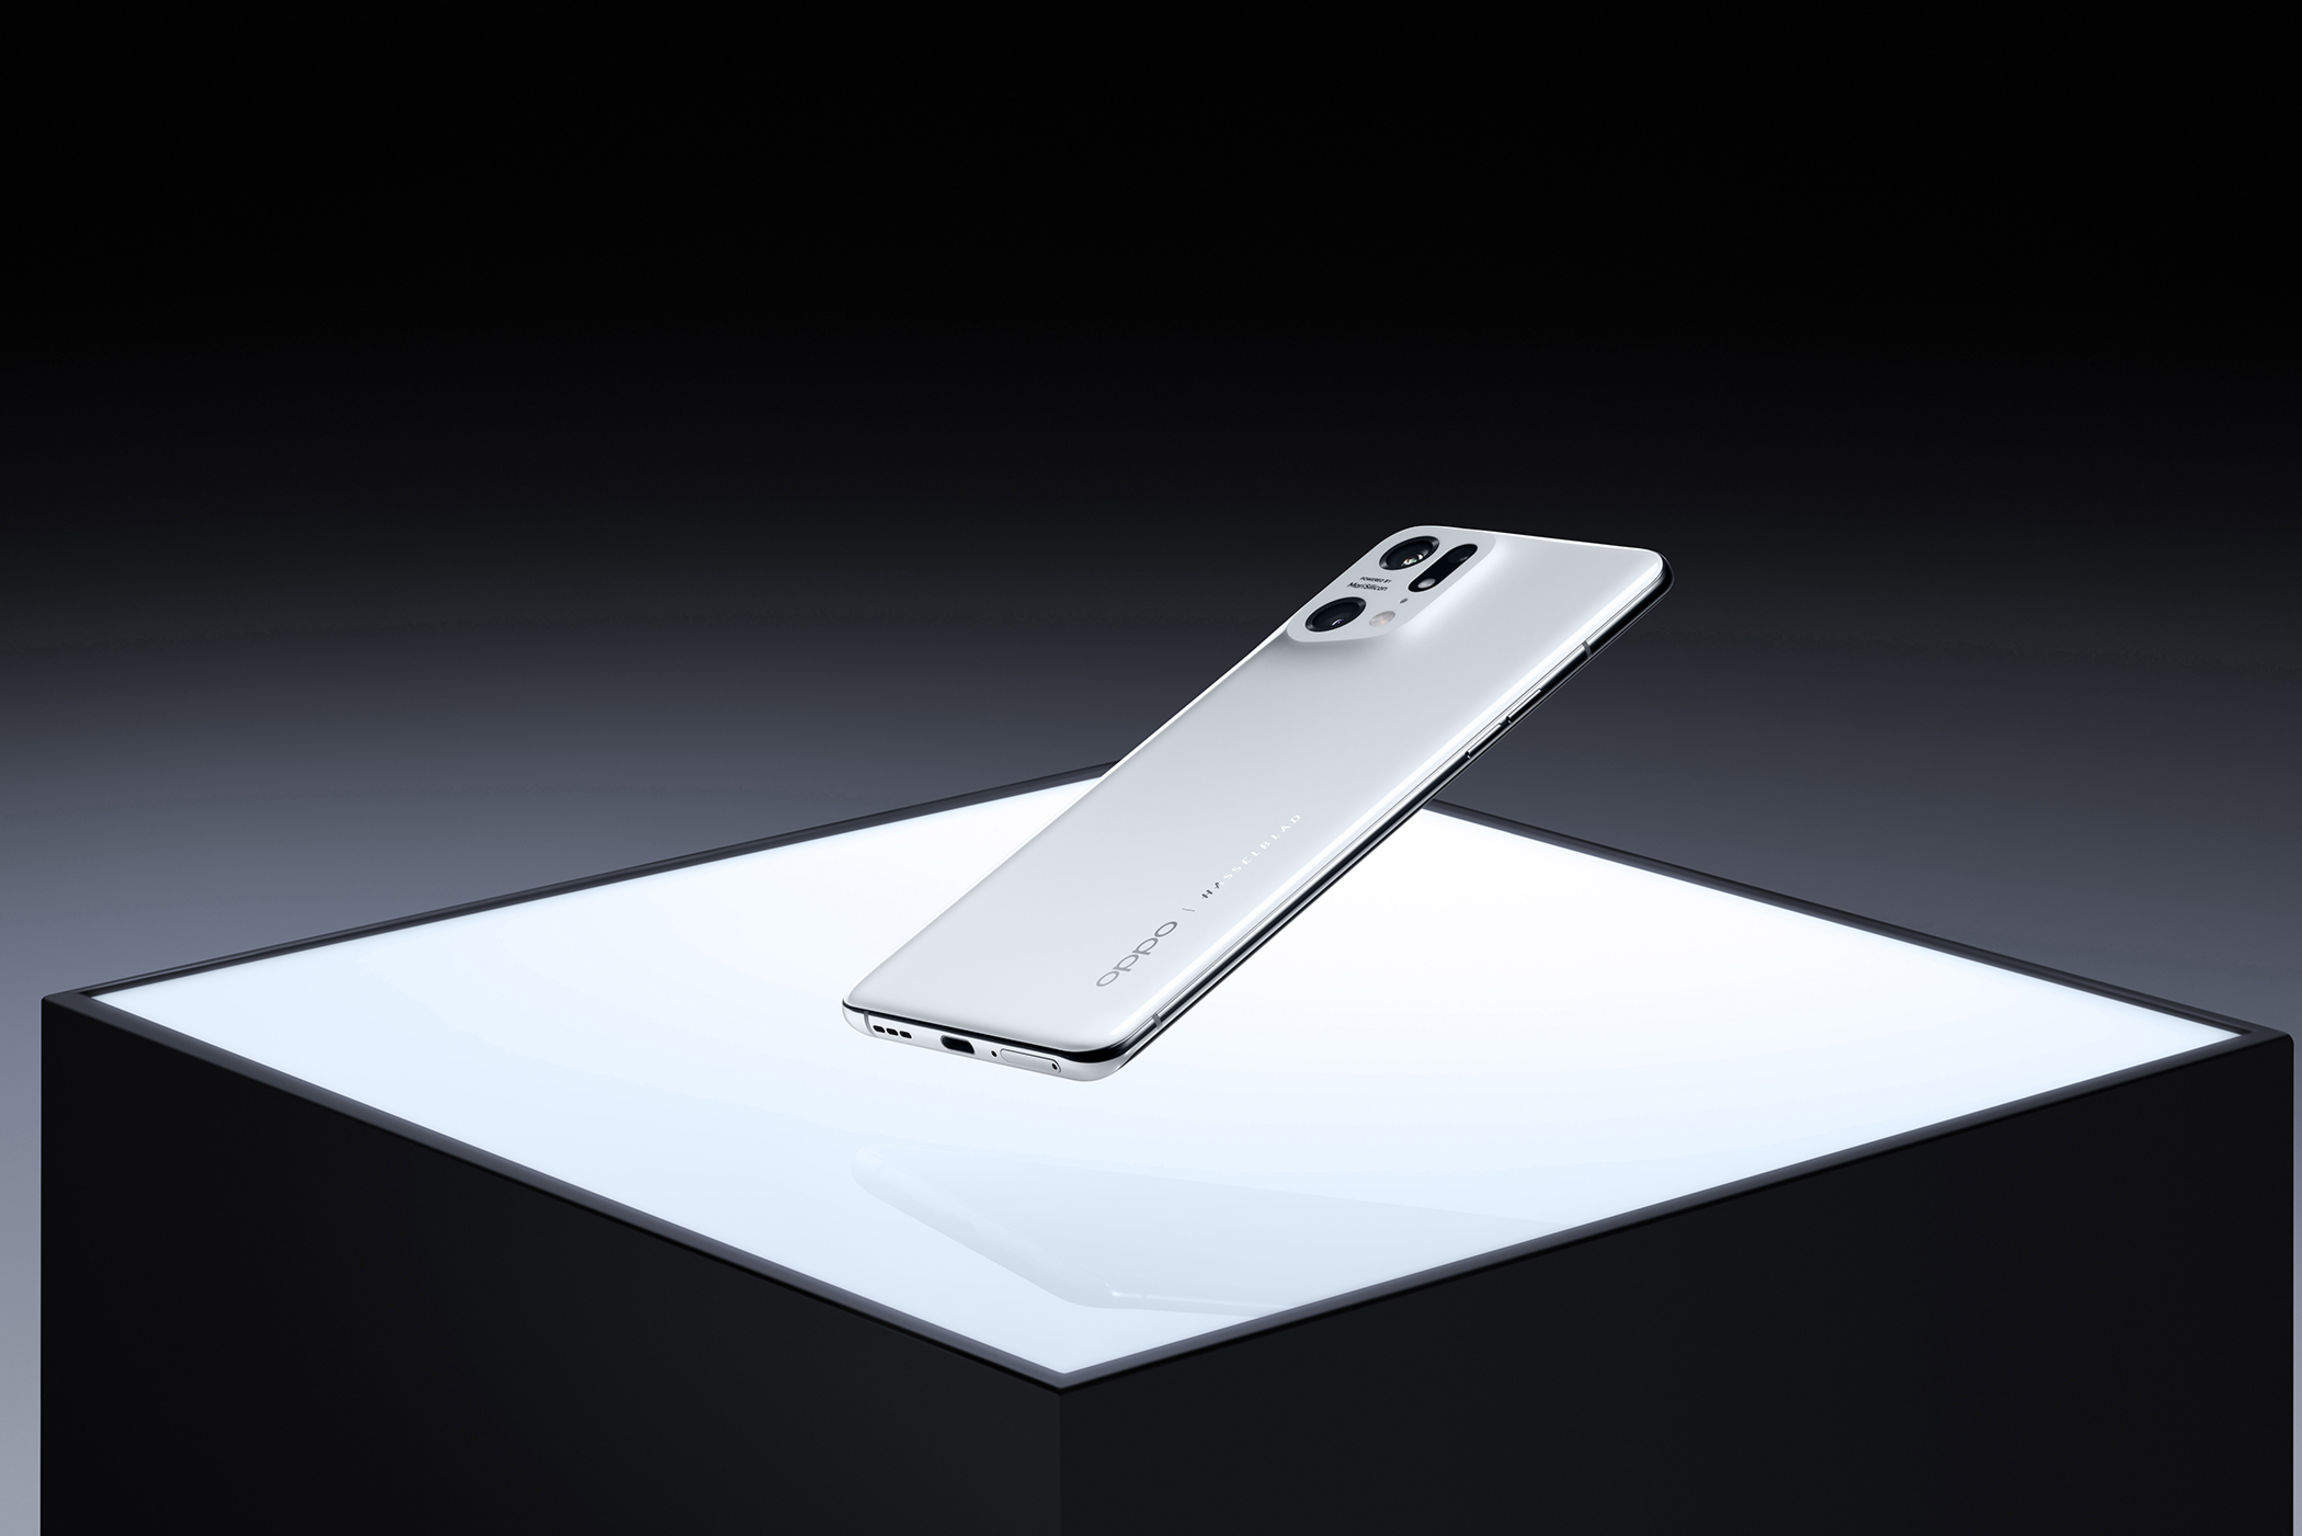 OPPO Find X5 Series phone shapes curved ceramic design in space age style